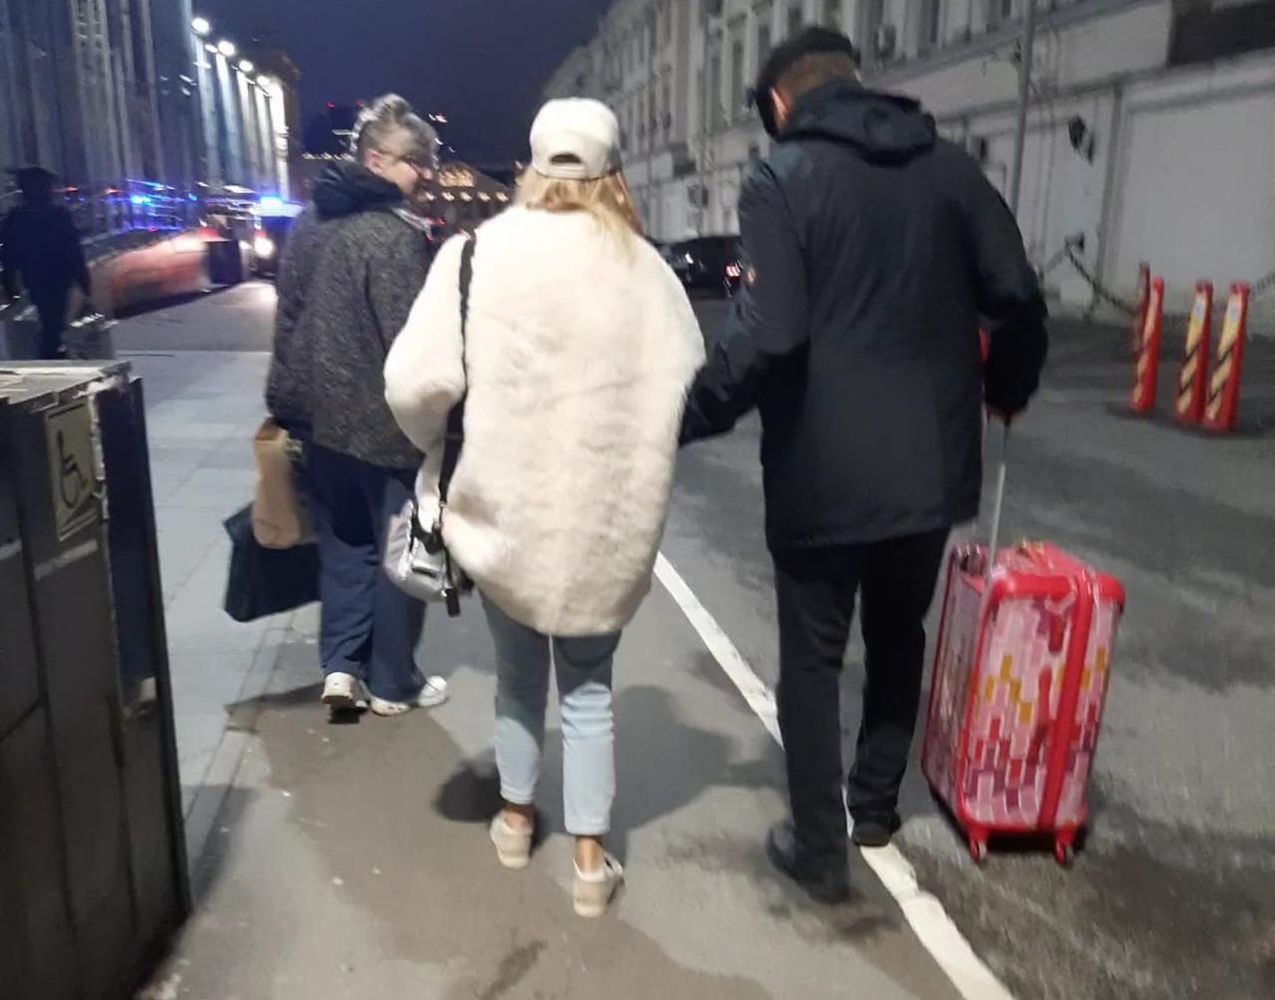 Photos of Alla Pugacheva’s return to Russia have been published: fur coat and sneakers